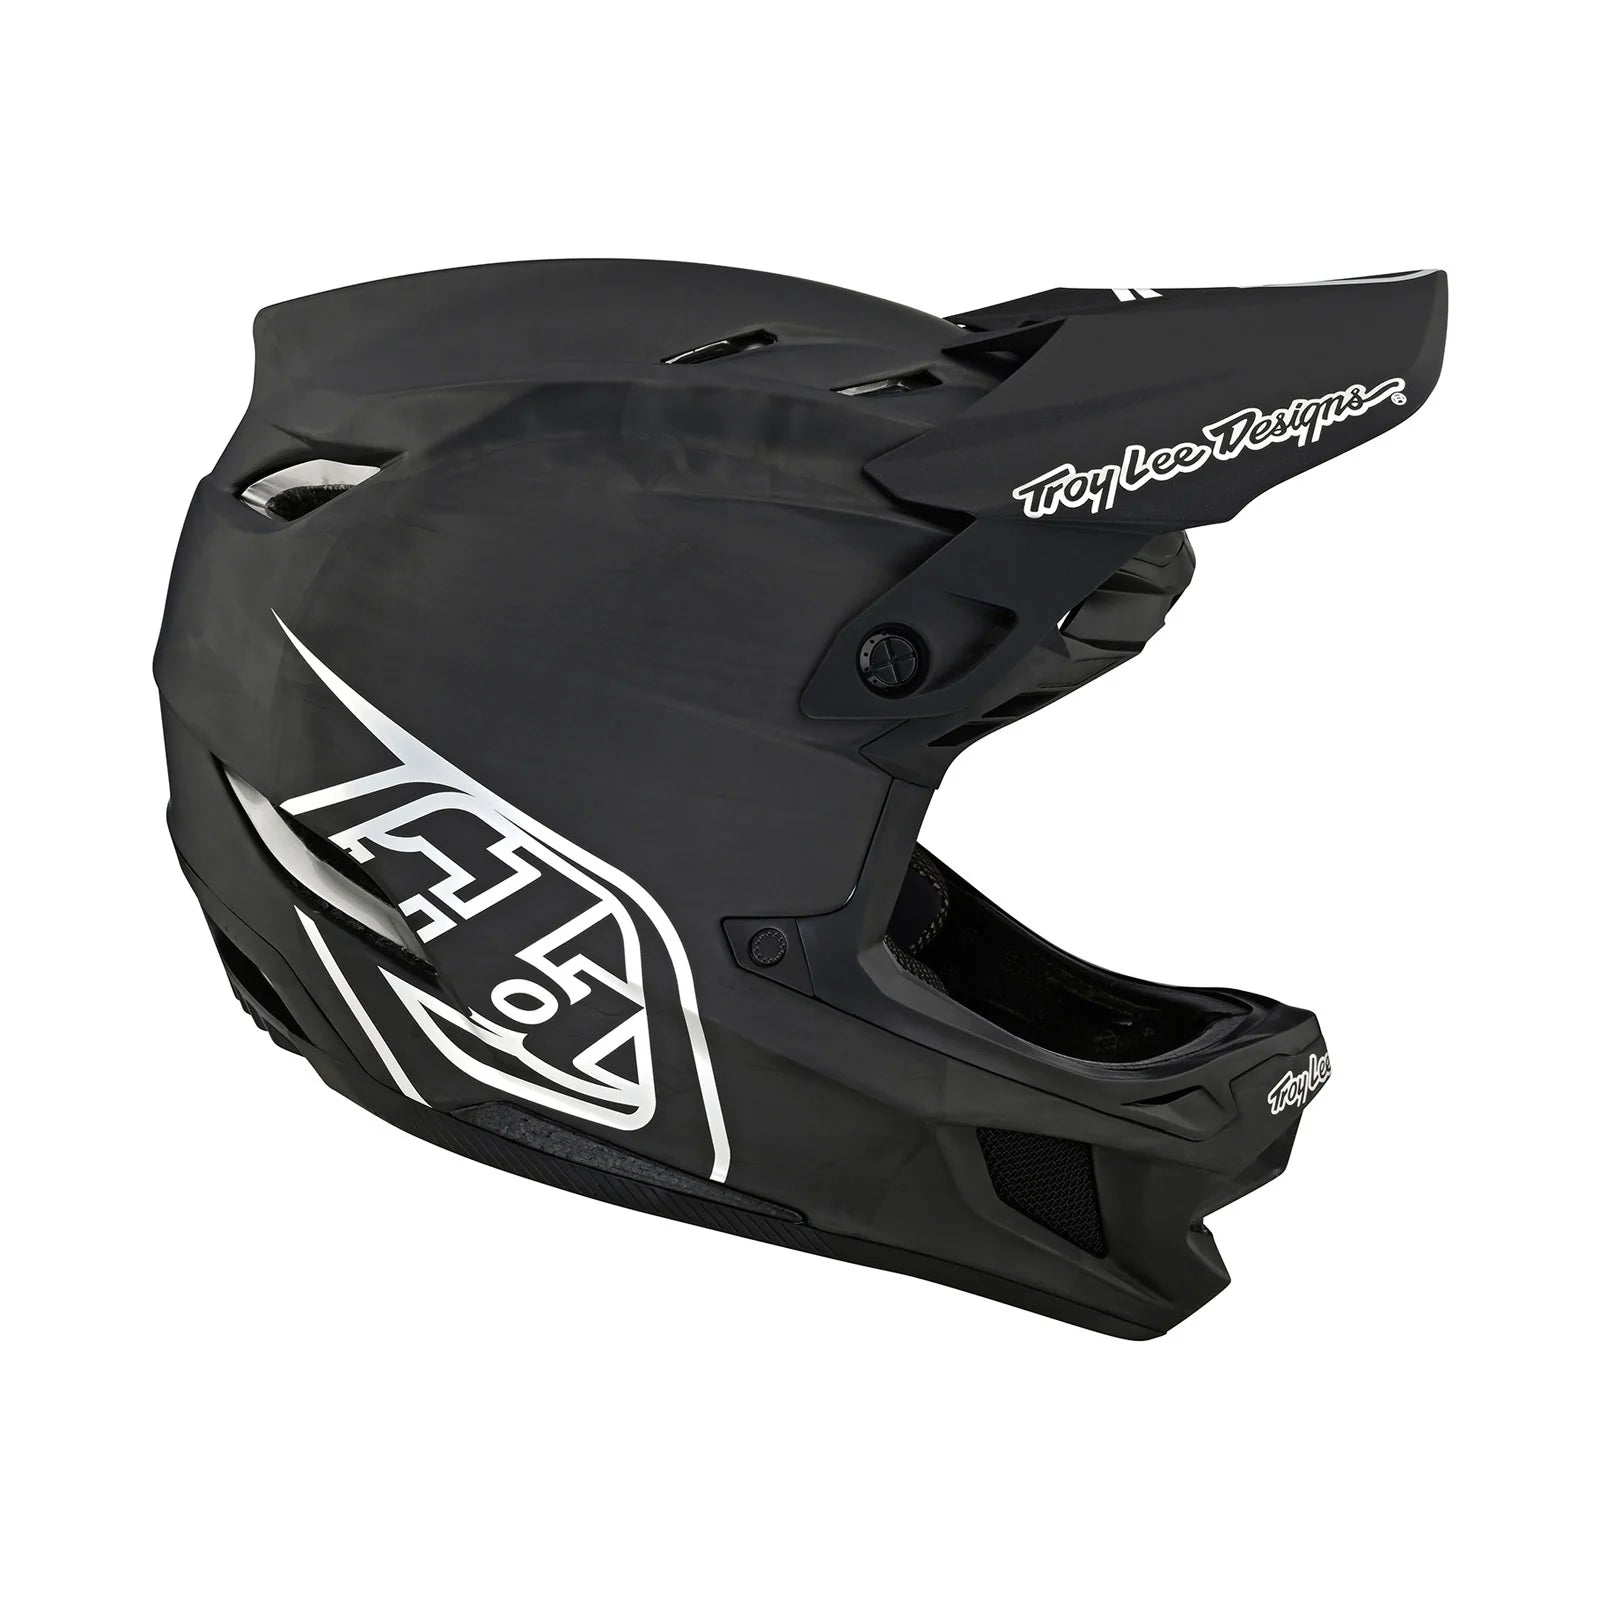 The TLD D4 AS Carbon W/MIPS Helmet Black / Silver, featuring MIPS Brain Protection System, is shown on a white background.